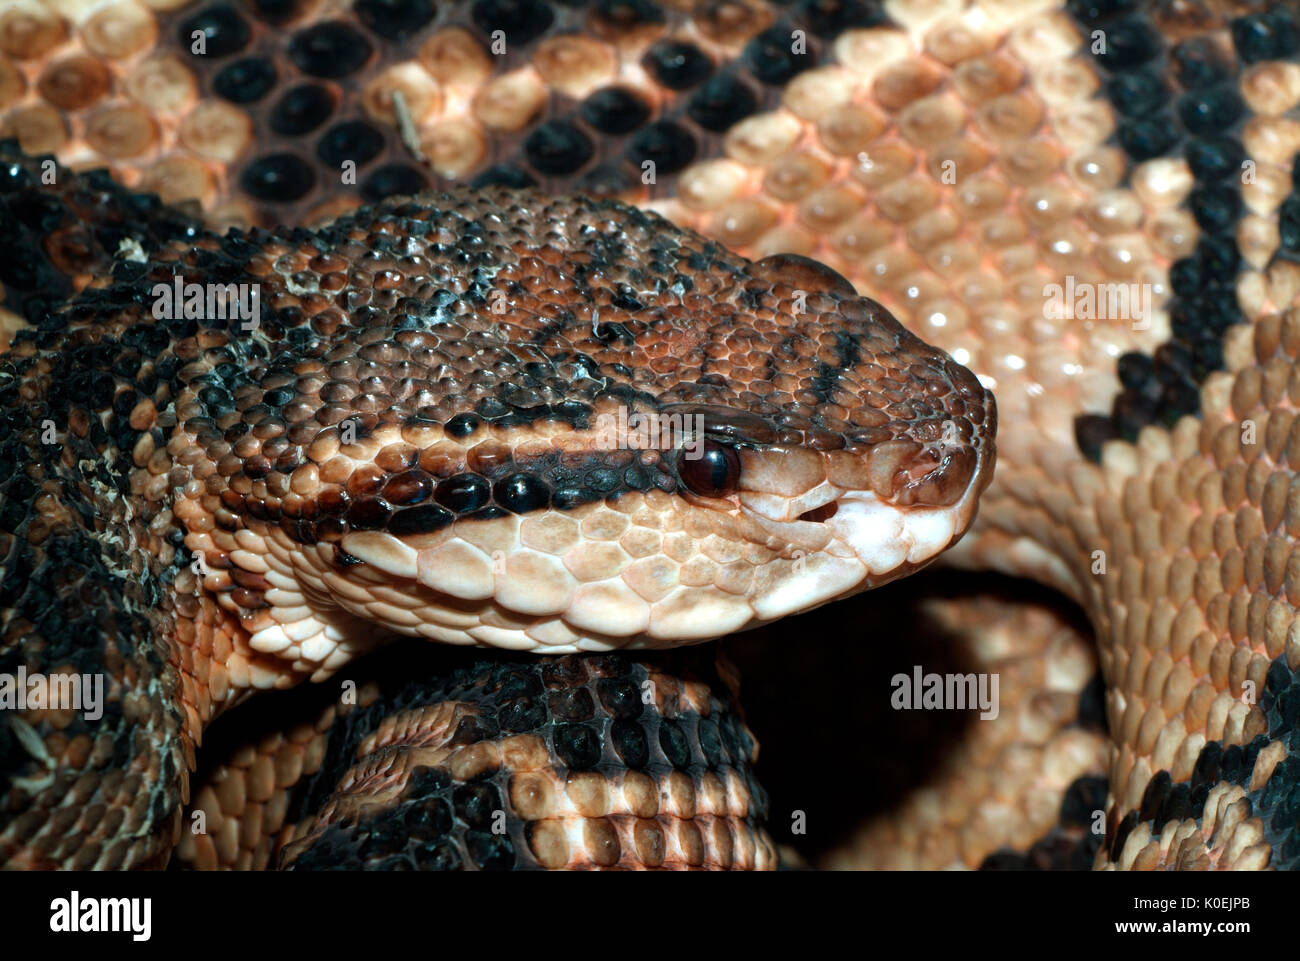 Bushmaster, Lachesis muta stenophrys, Central and South America, jungle, poisonous, venemous, Stock Photo